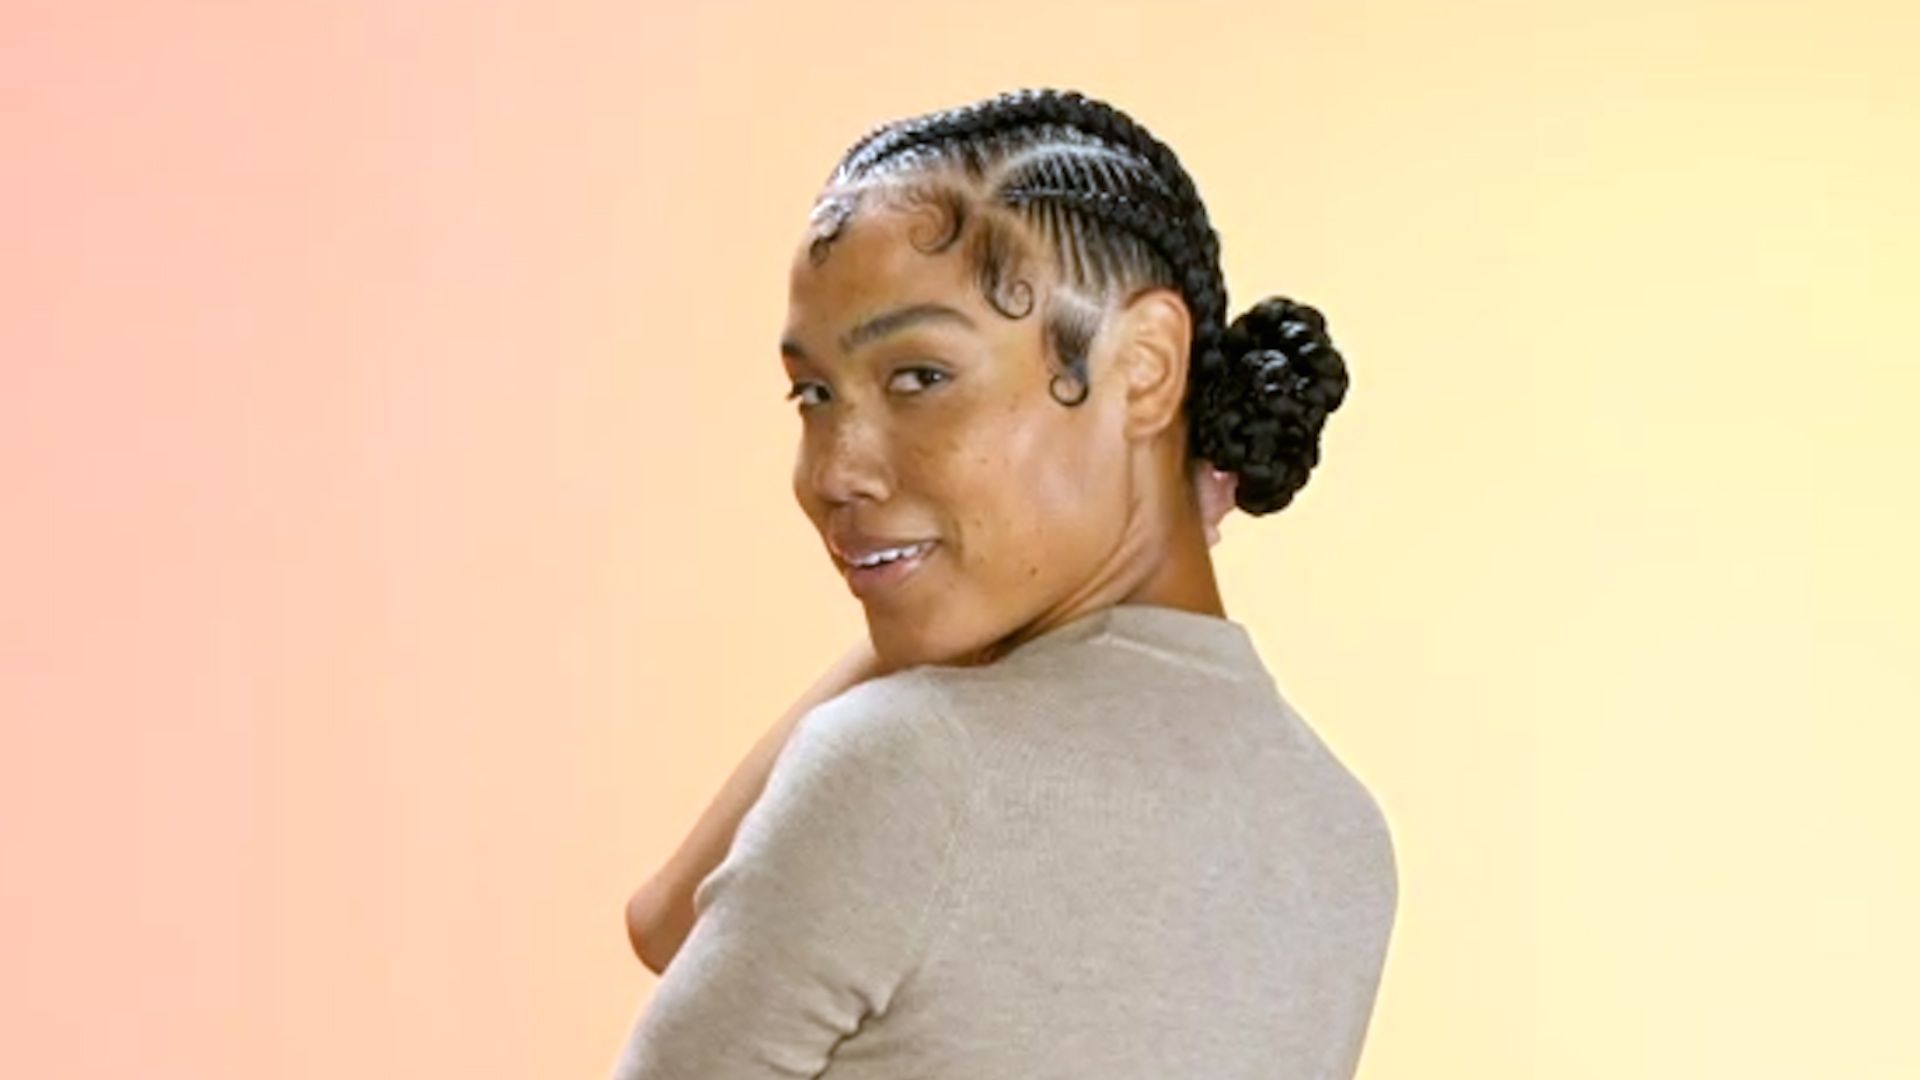 The Braid Up': How to Do a Bob Twist in 2022